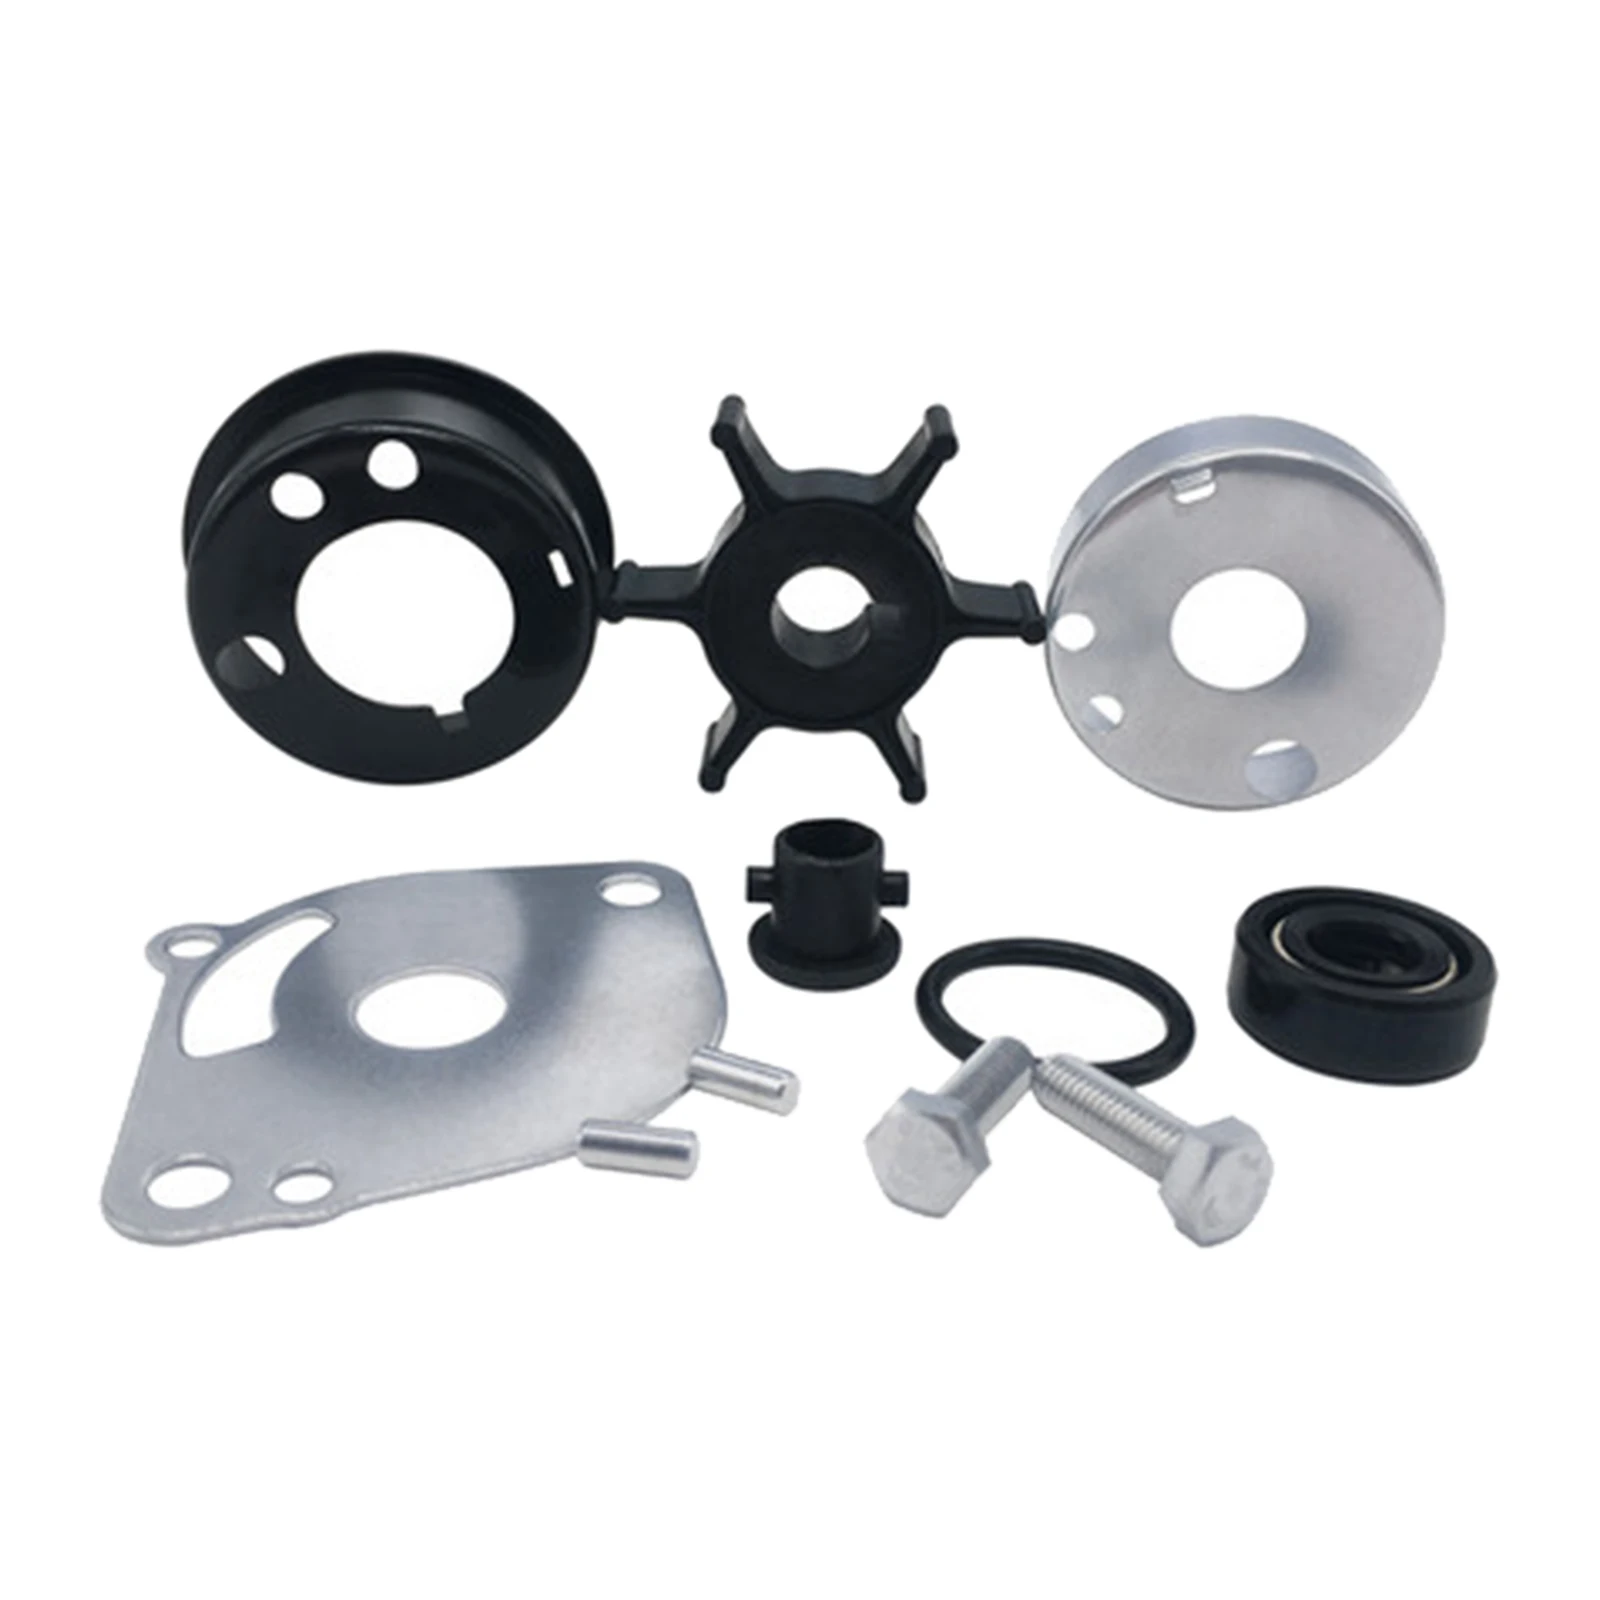 Water Pump Impeller Kit for YAMAHA 2HP 2 STROKE 1988-2009 6A1-W0078-02-00